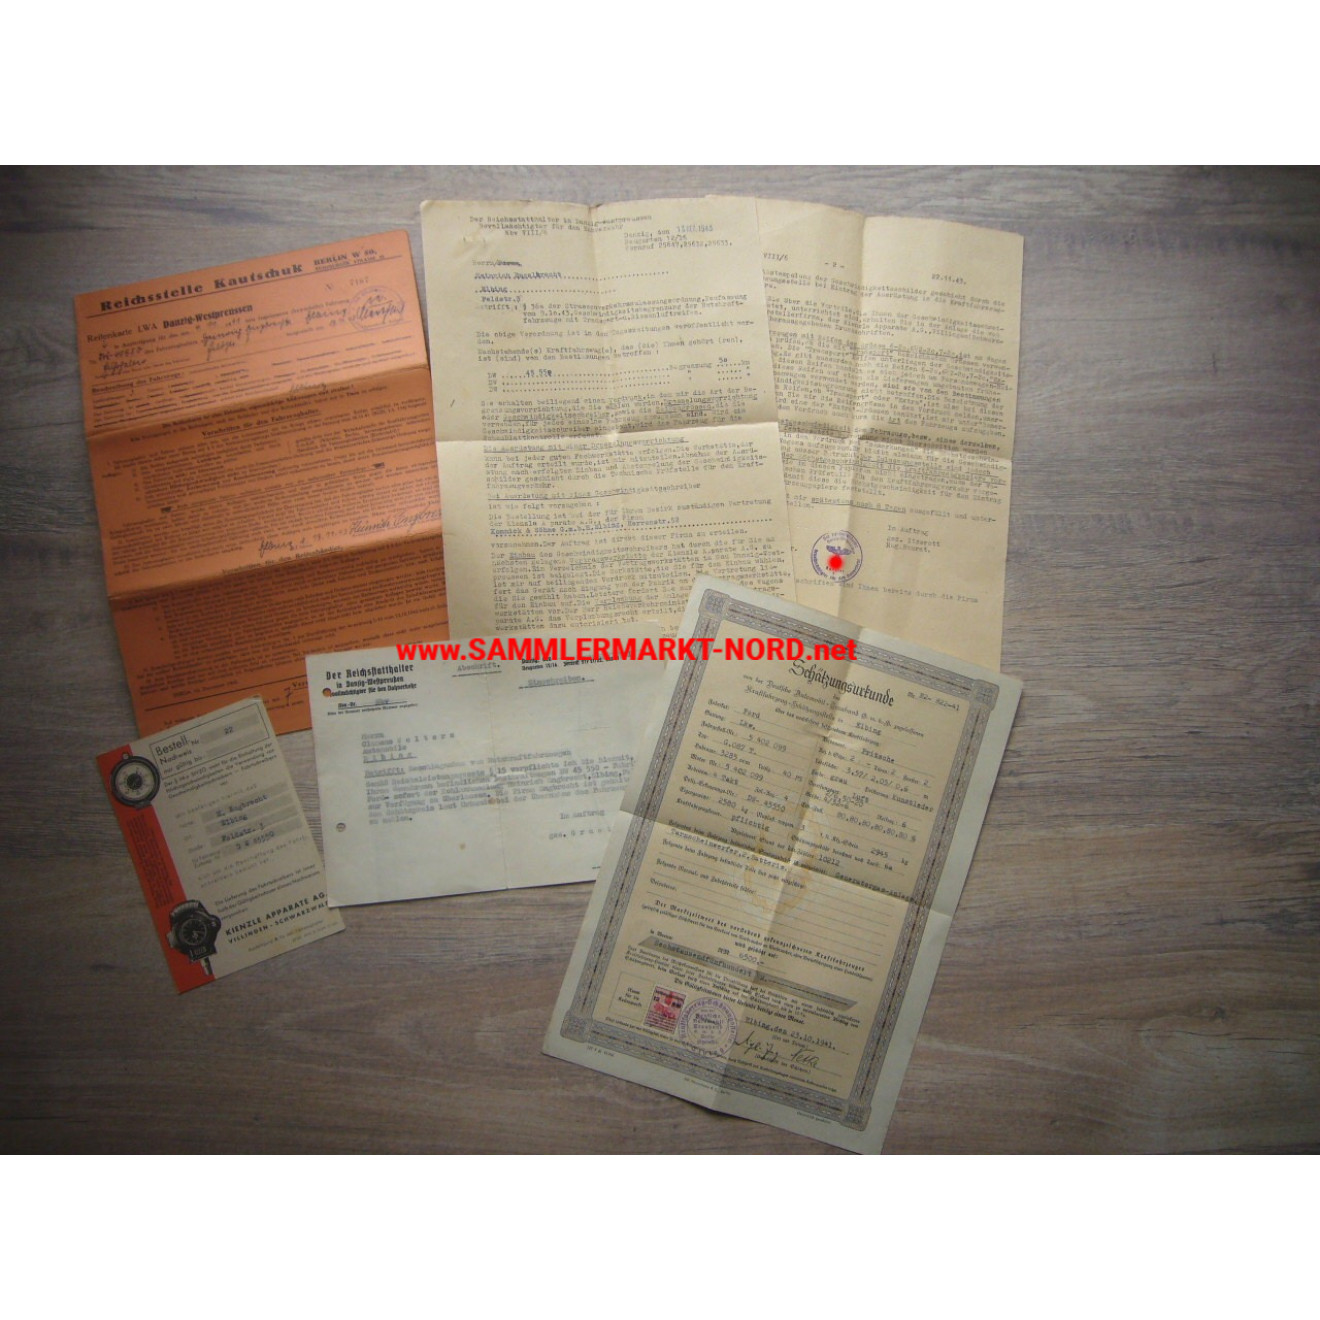 Wehrmacht - Gdansk-West Prussia - Conscription of a truck to the Wehrmacht